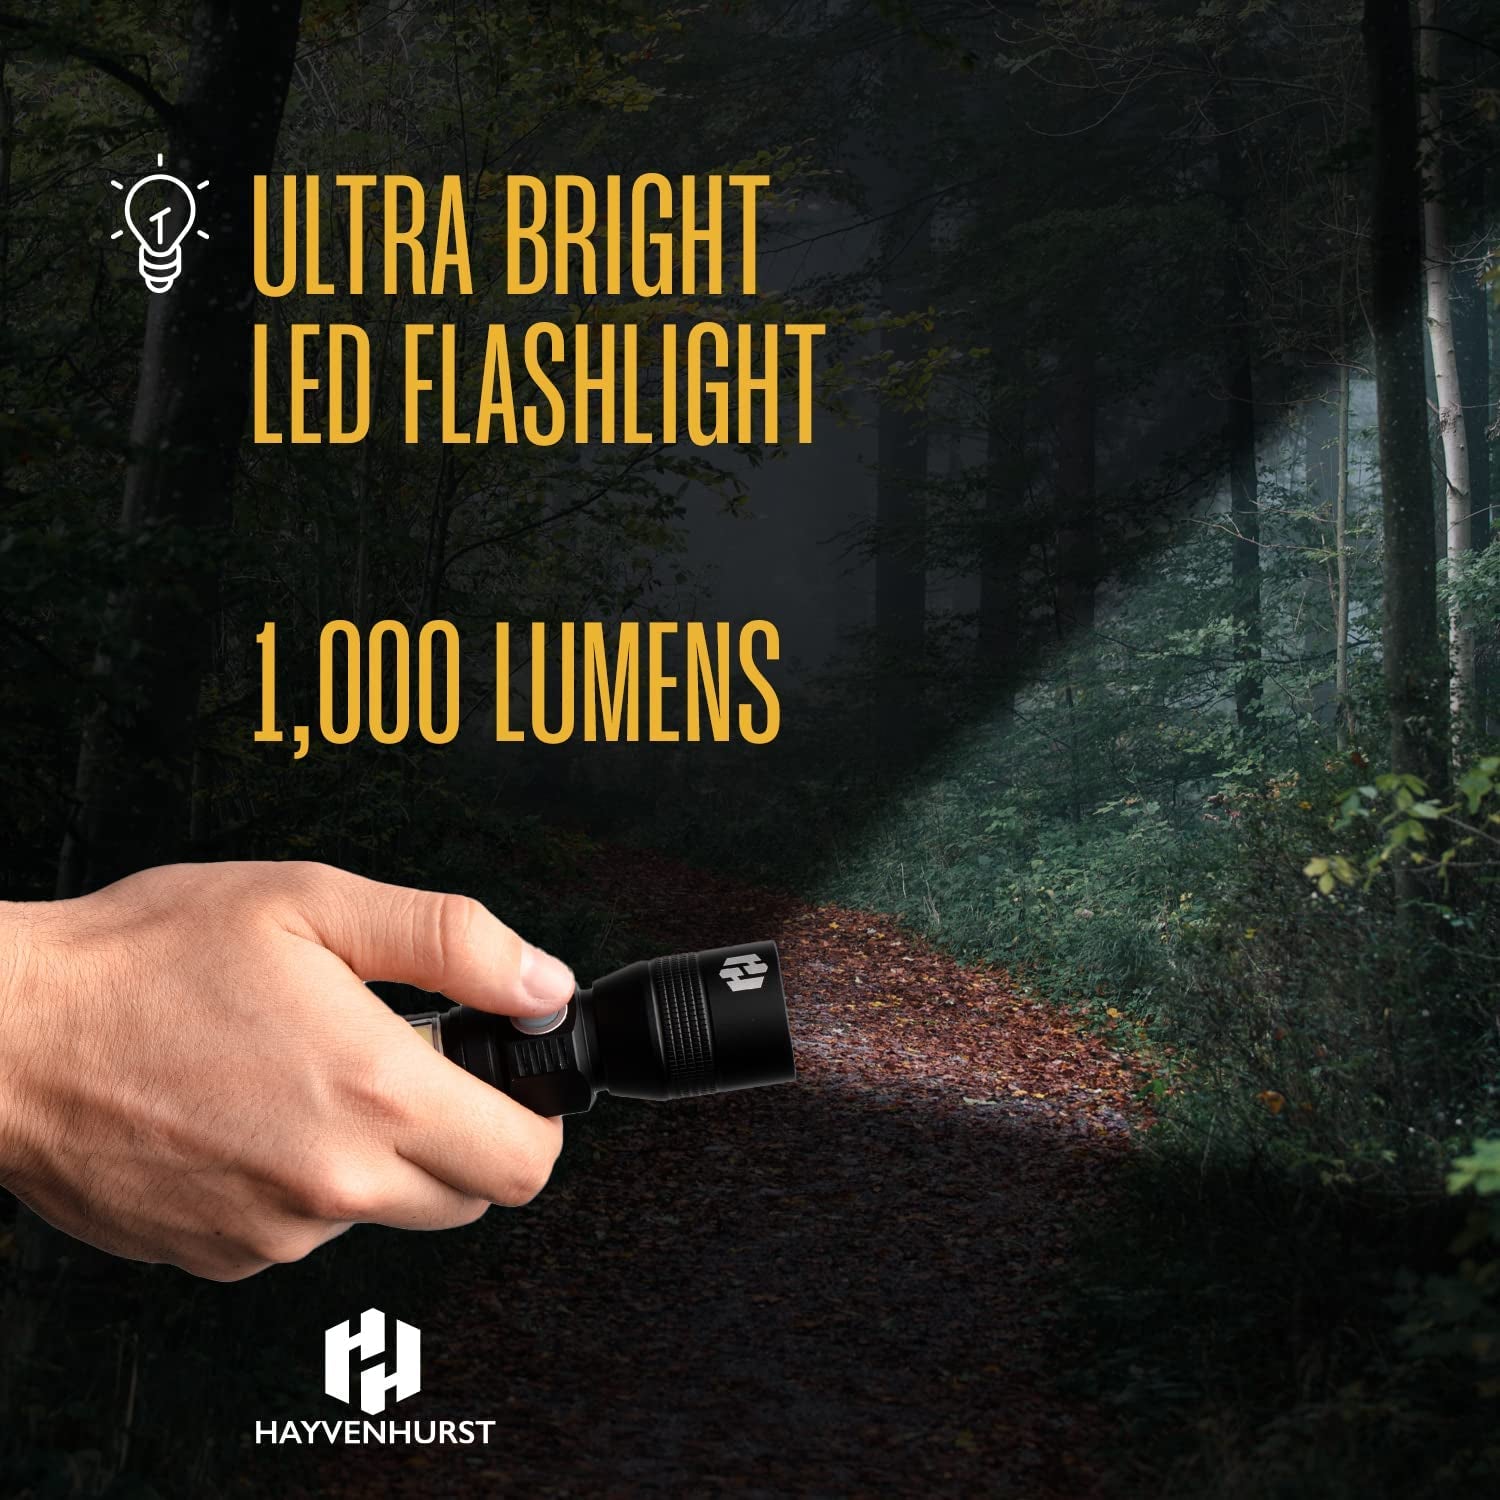 LED Flashlight - EDC Flashlight - Tactical Flashlight - 3 in 1 Lightweight, Compact and Rechargeable Pocket Flashlight with Lavish Black Body for Emergency Power Outage